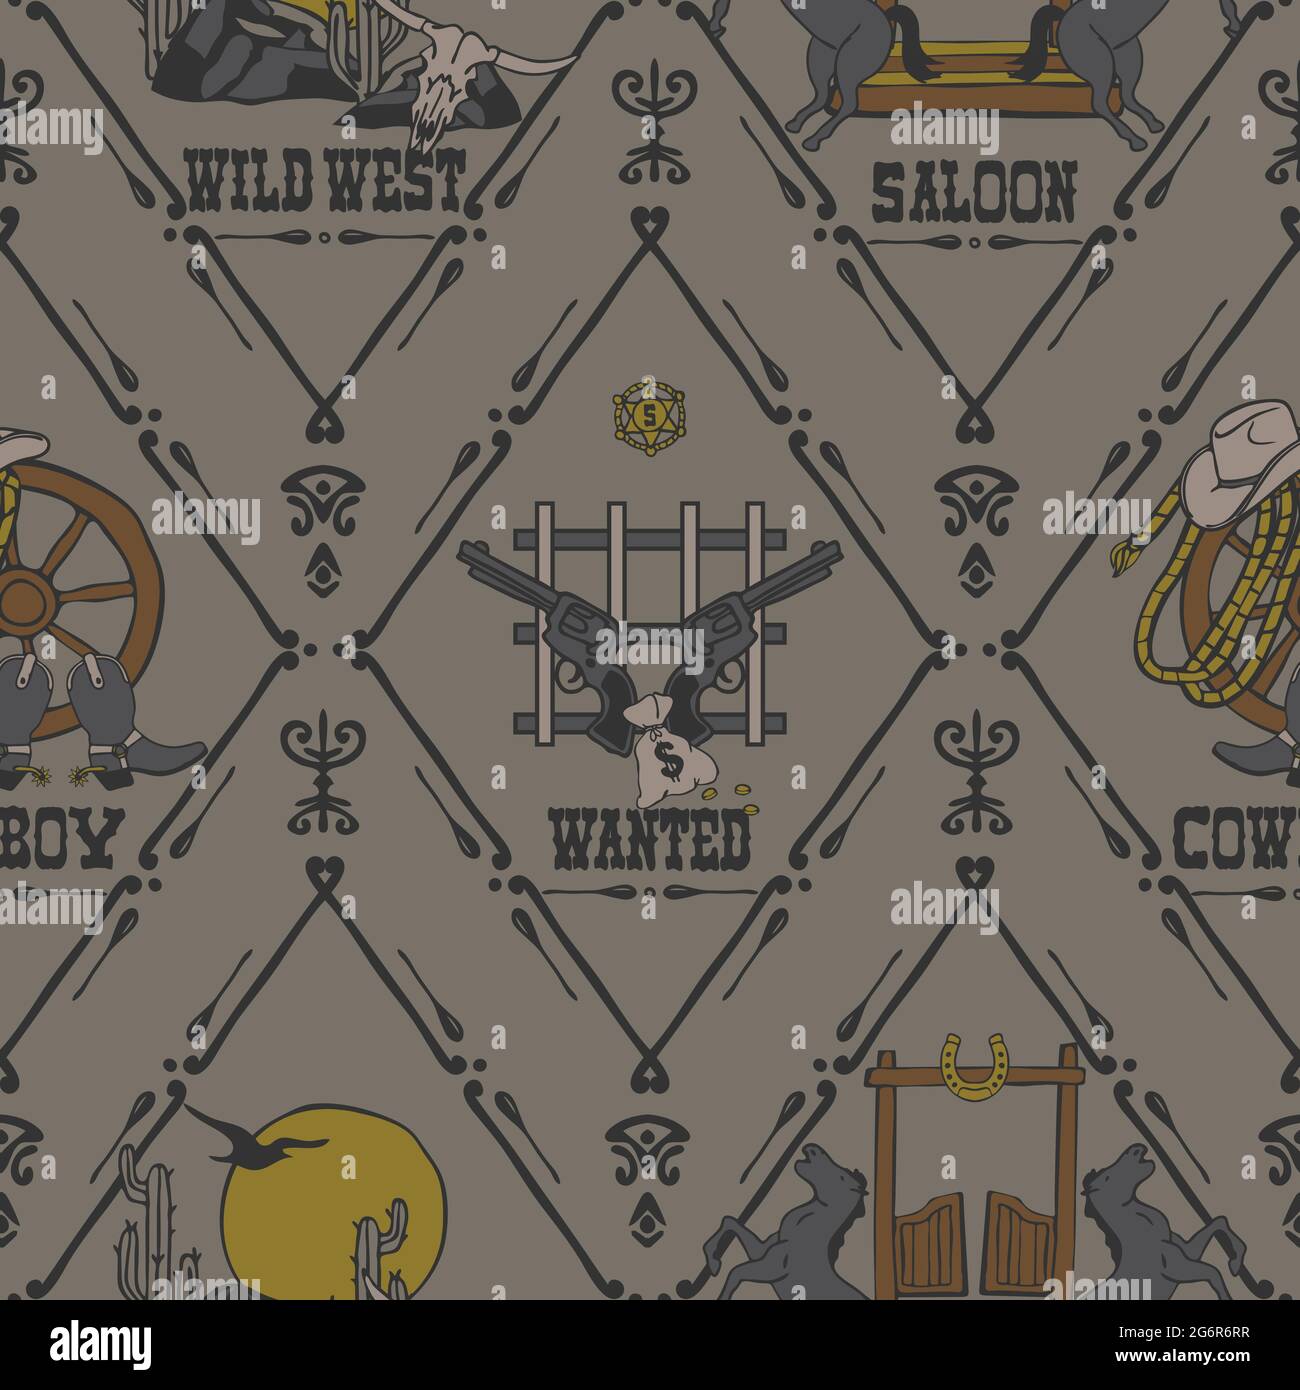 Seamless vector pattern with wild west logos on grey background. Decorative western wallpaper design. Geometric wanted poster fashion textile. Stock Vector